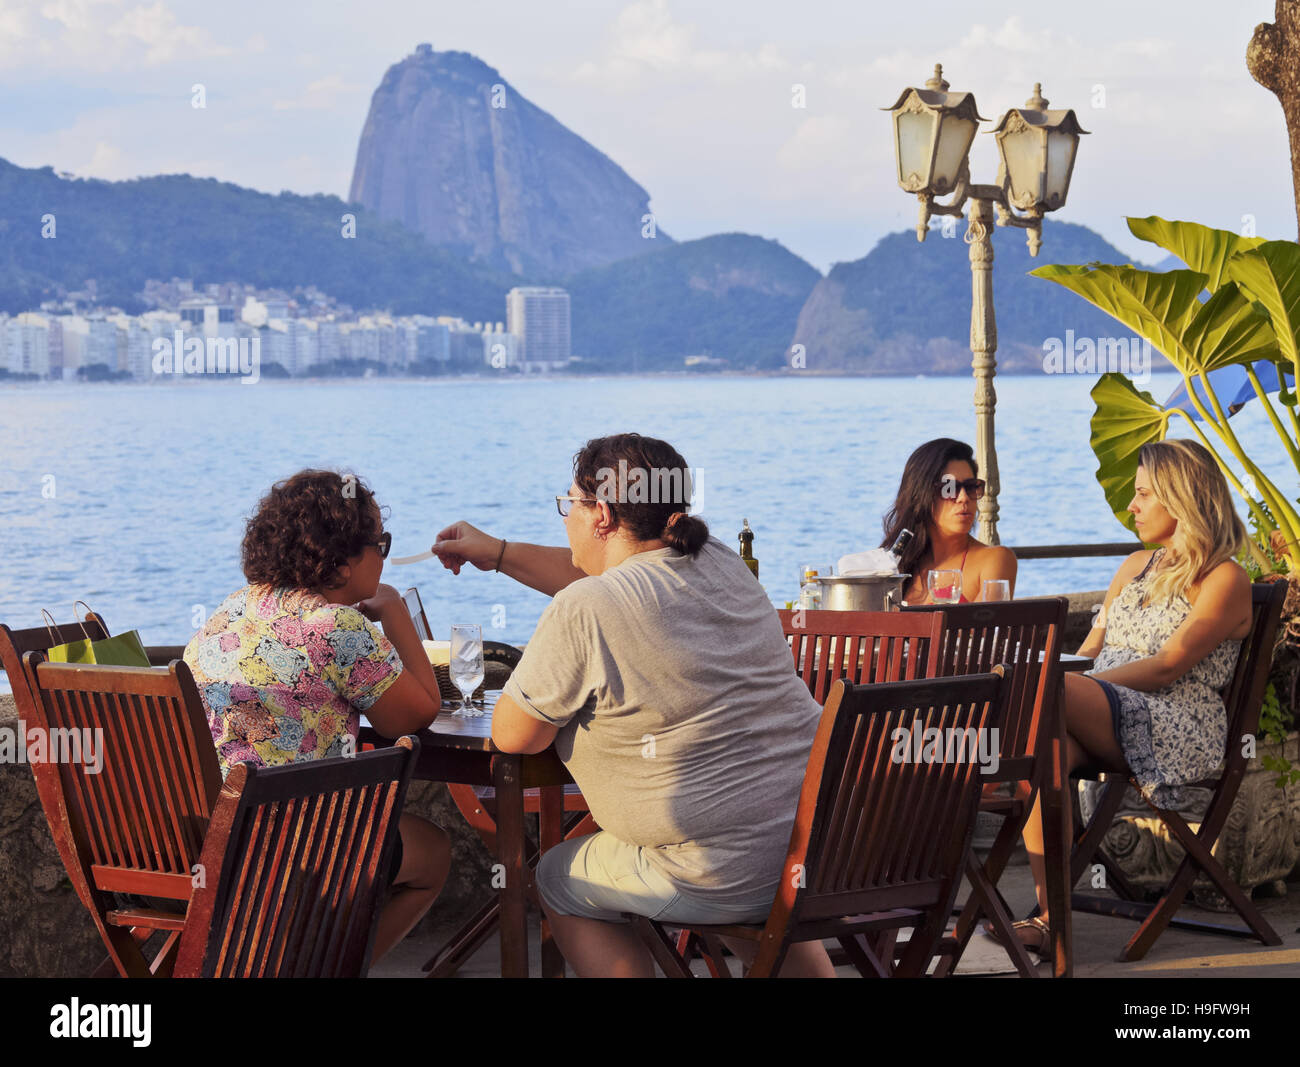 Brazil, City of Rio de Janeiro, Copacabana, Cafe in the Fort Copacabana with the view of Sugarloaf Mountain. Stock Photo